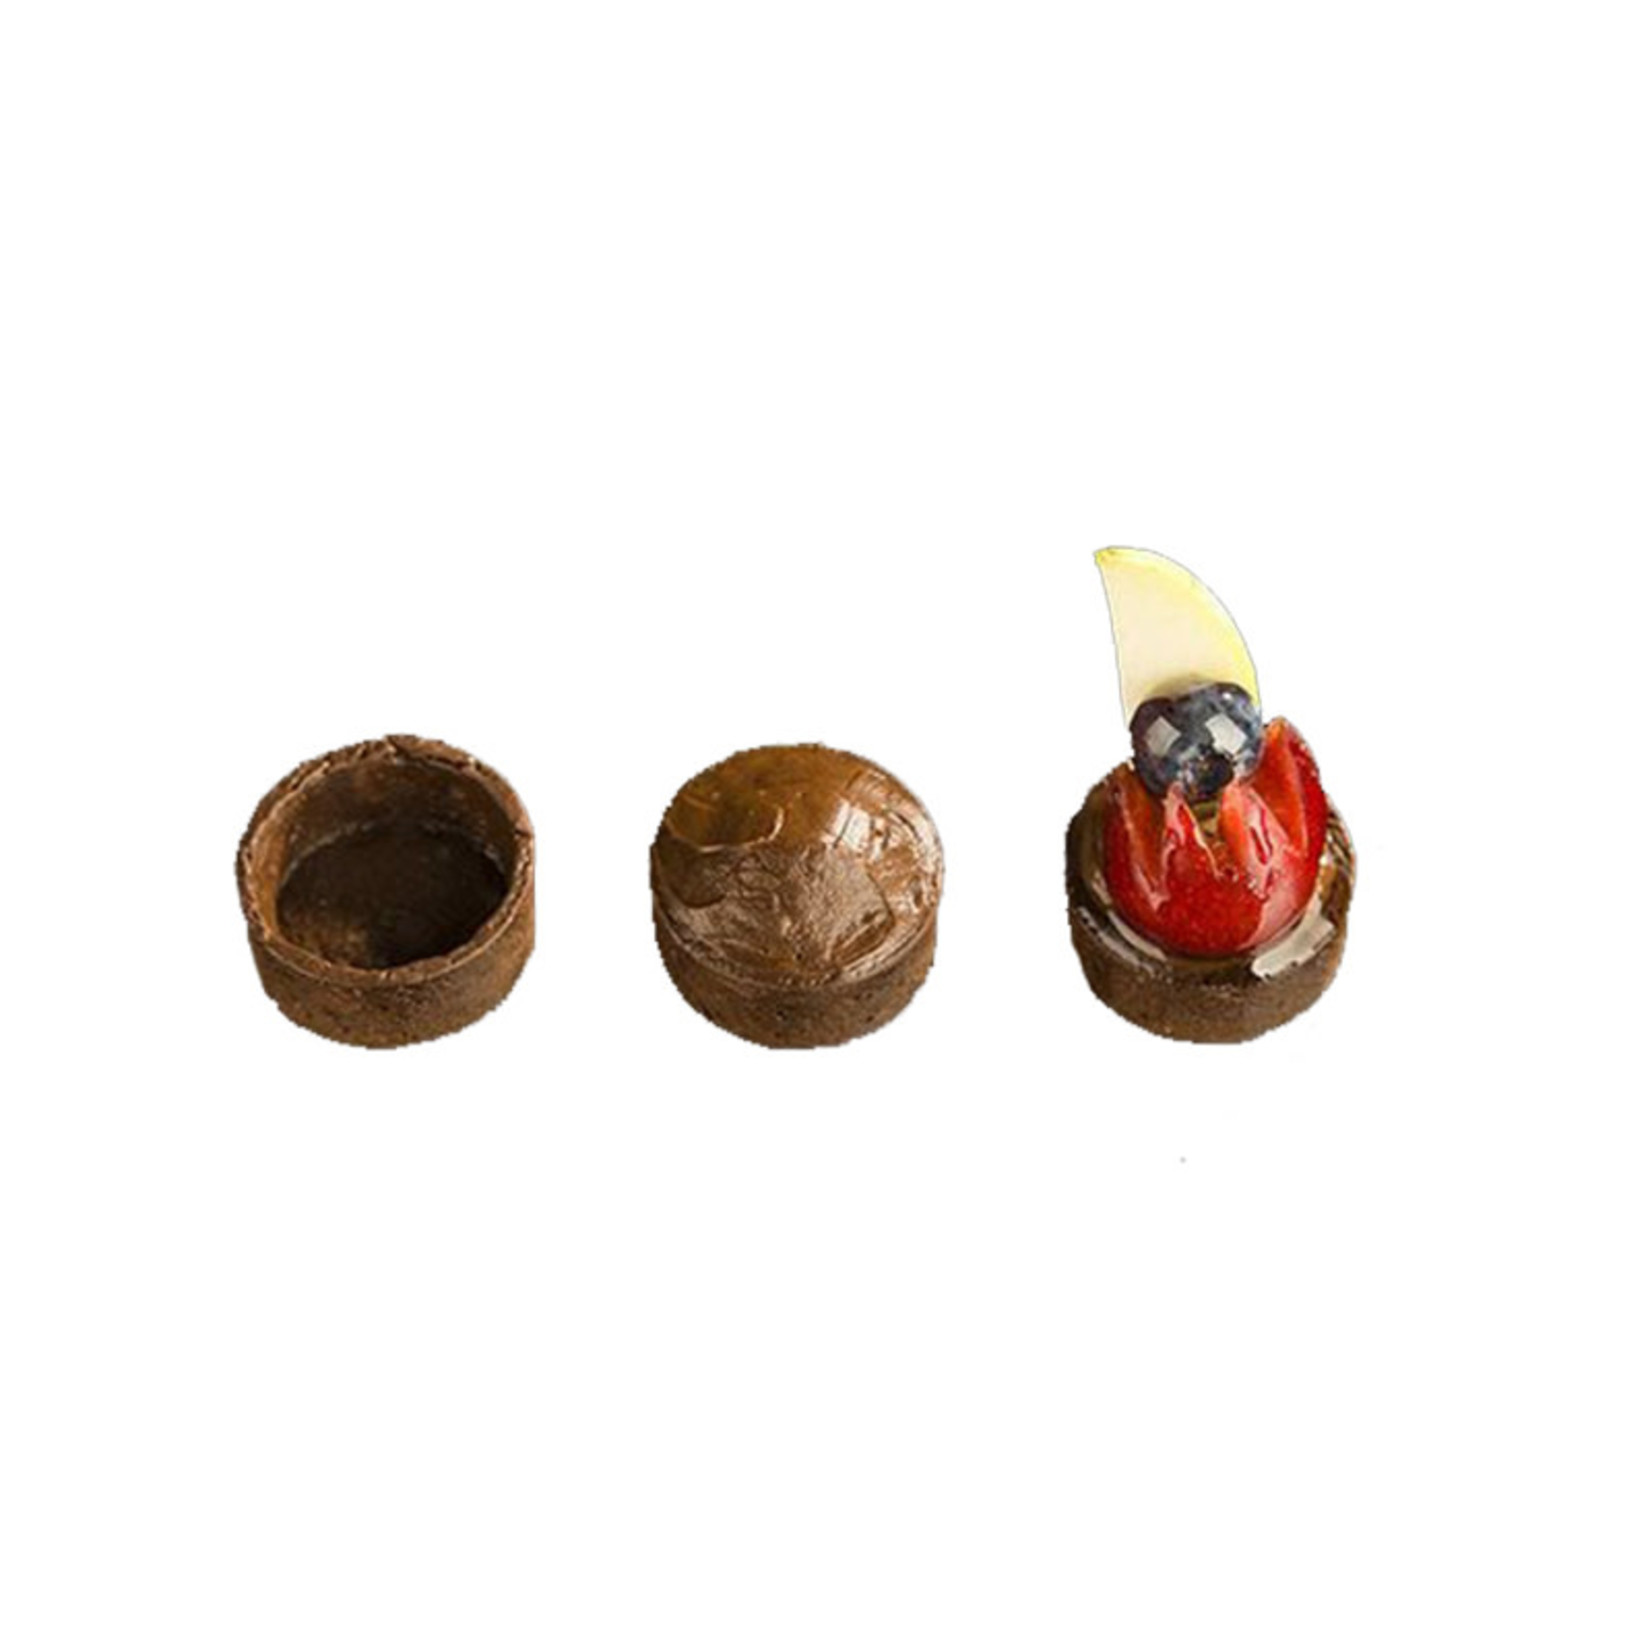 Delifrance Delifrance - Tart shell, Chocolate round - 1.5'' (48ct) sleeve, 78448-S